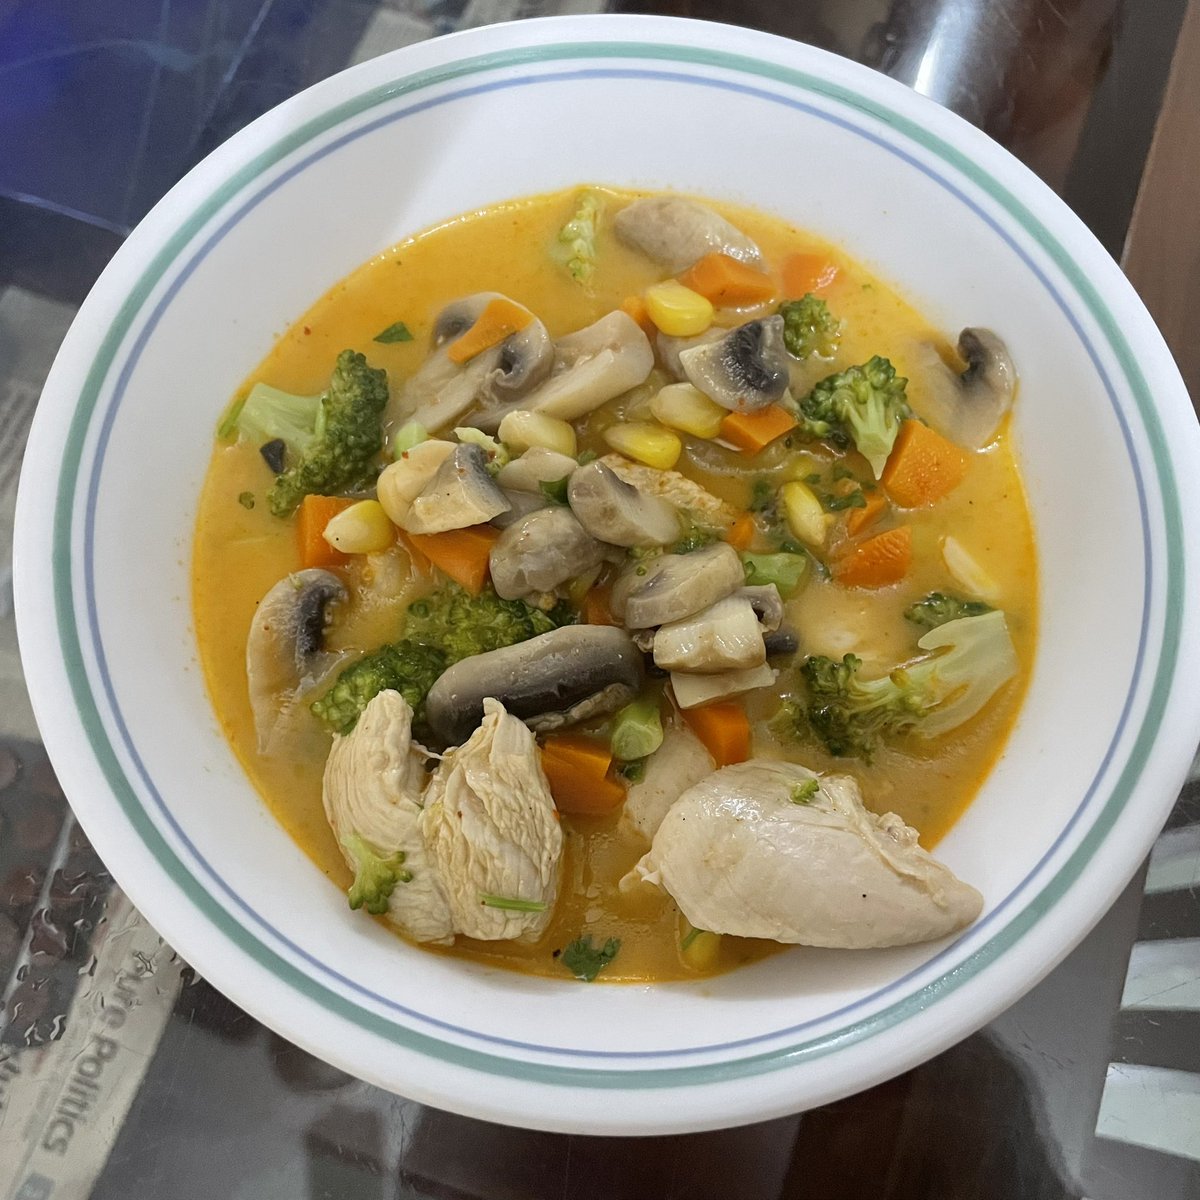 Chicken breast soup with broccoli, mushrooms, carrot, corn and cheese cooked in ghee Spices and condiments: red chilli powder and pinch of pepper #metabolic #health #nutrition #lowcarb #dlife